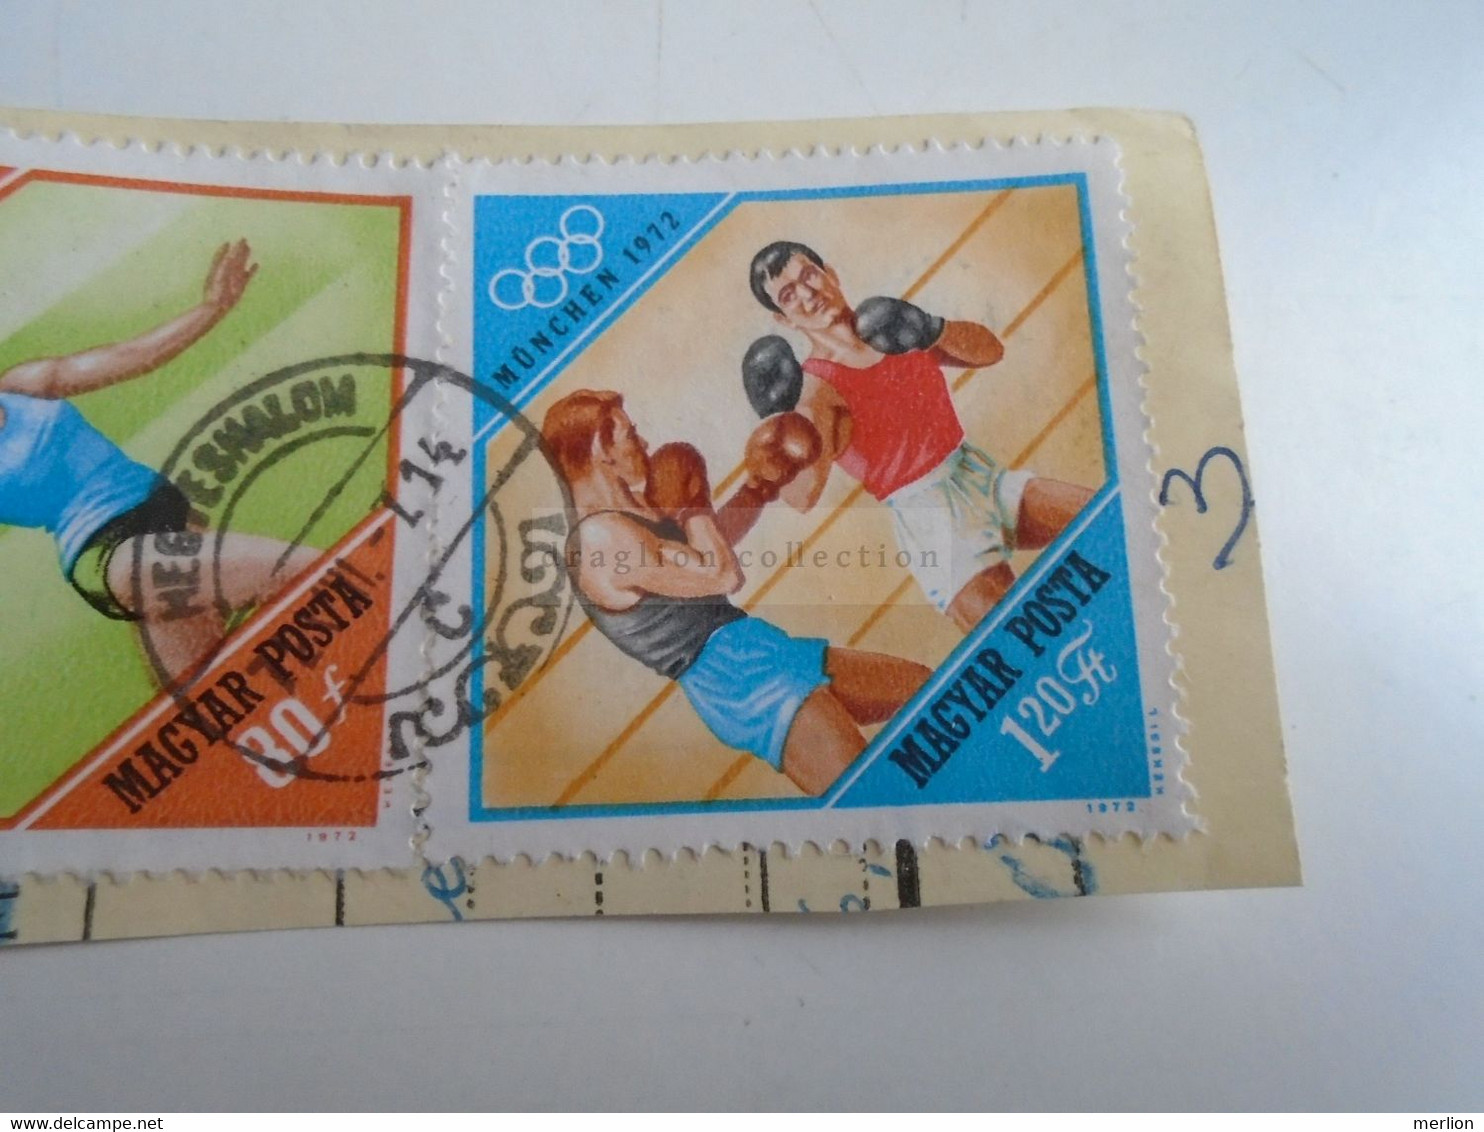 D187486   Parcel Card  (cut) Hungary 1972 Hegyeshalom  - Stamp München Olympic Games - Box Boxing - Parcel Post